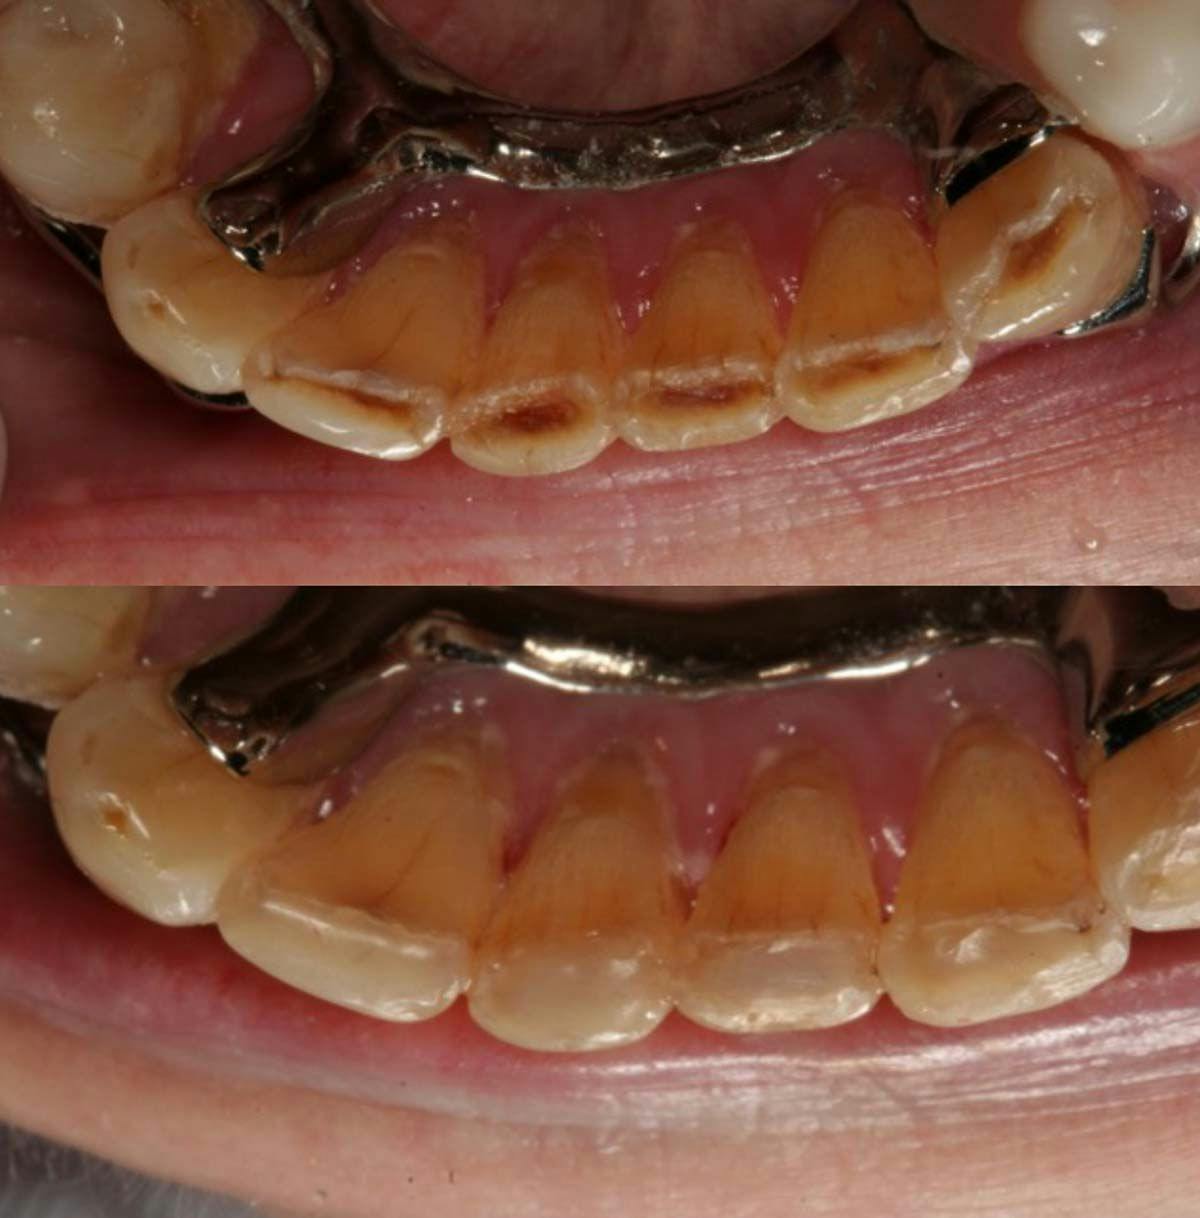 The before and after clinical photos courtesy of Tony Tomaro, DDS,Chicago, Illinois.